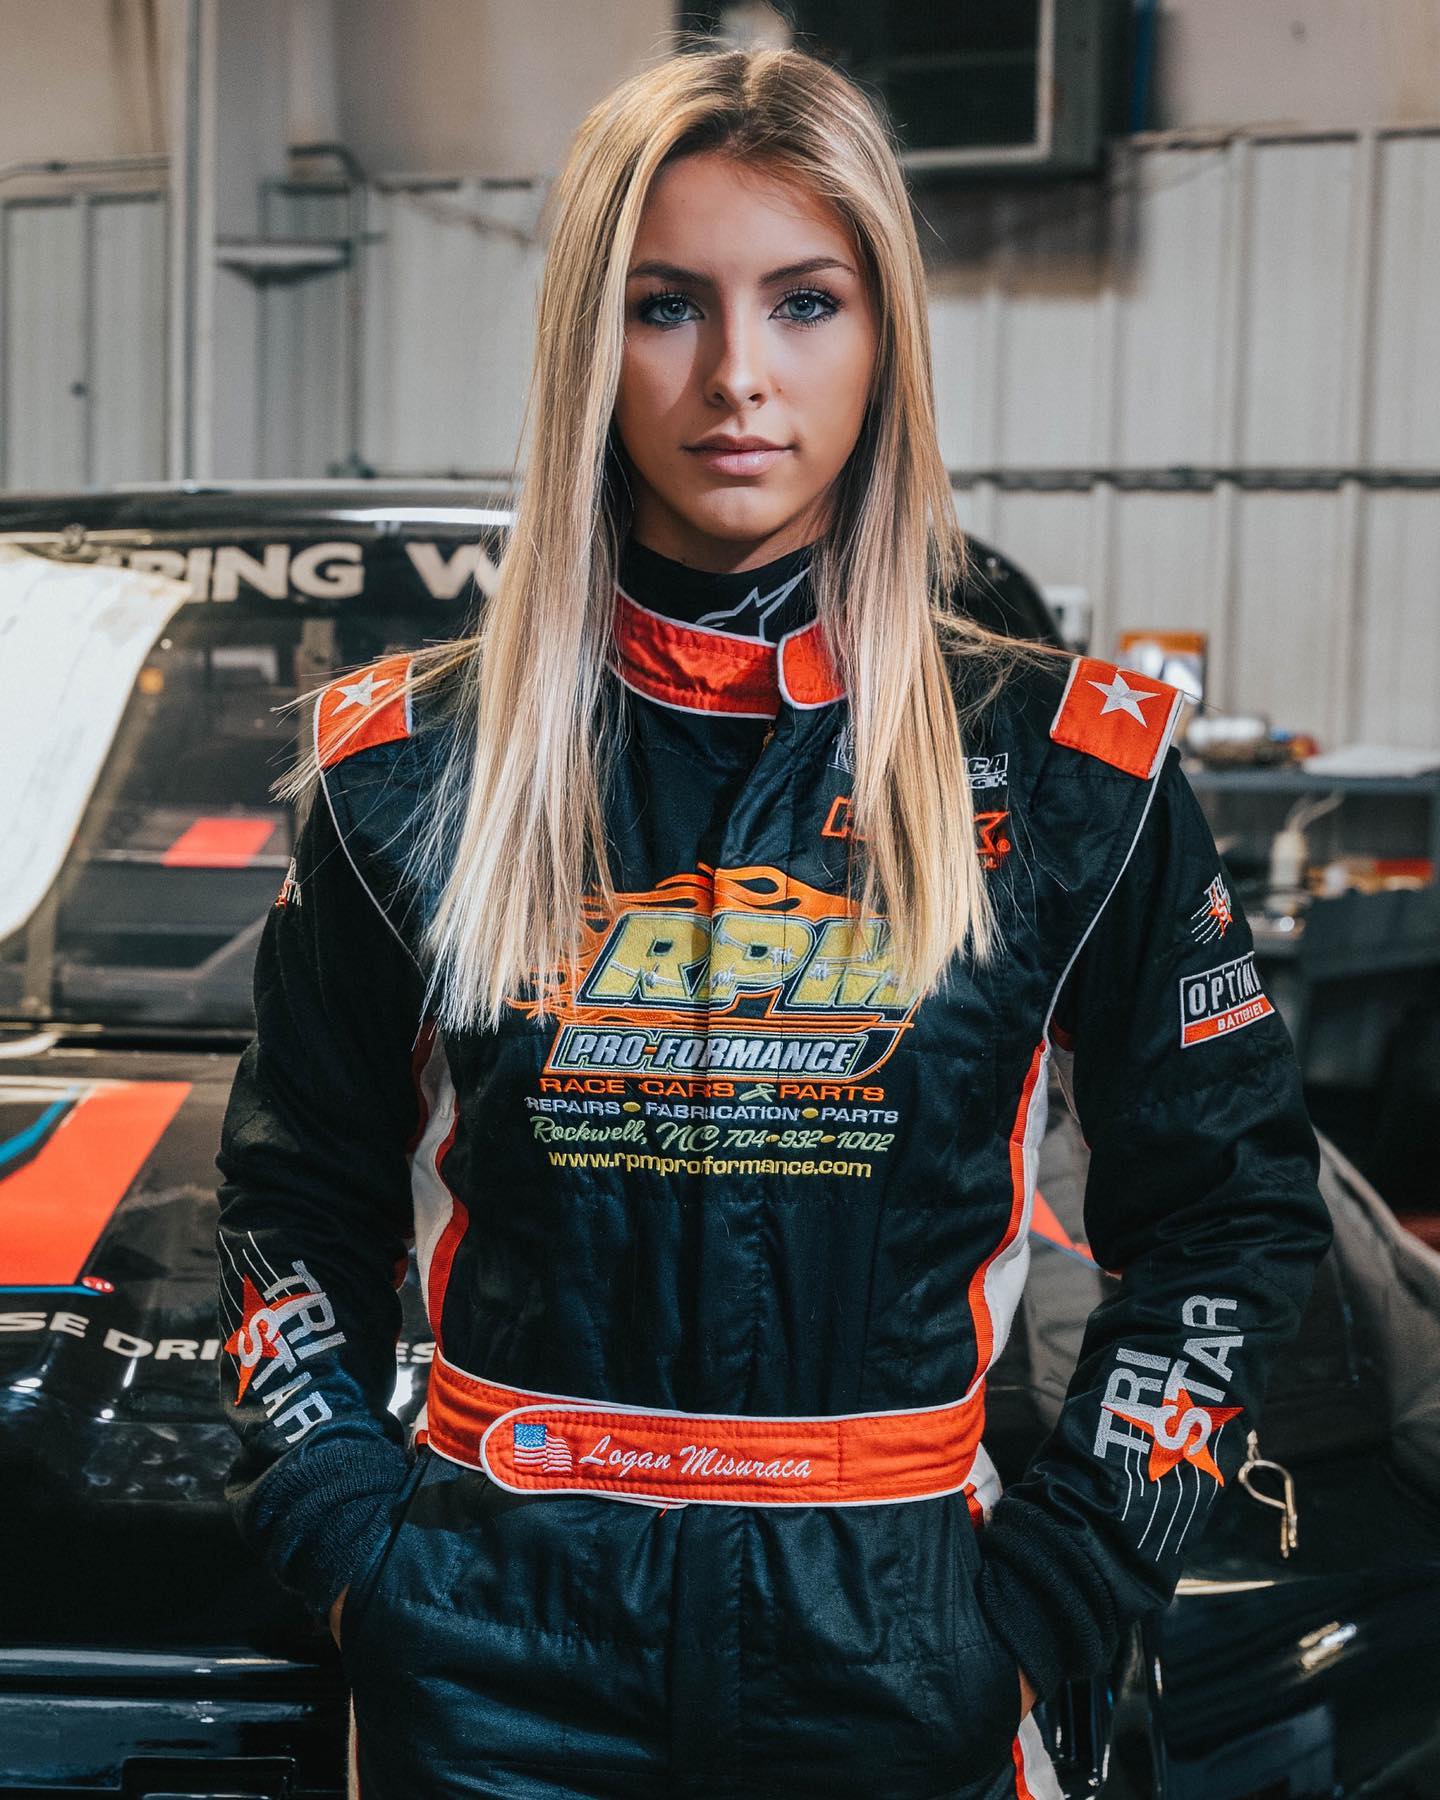 Logan Misuraca means serious business with her pursuit of racing full-time in the stock car ranks. (Photo: Logan Misuraca via Facebook)